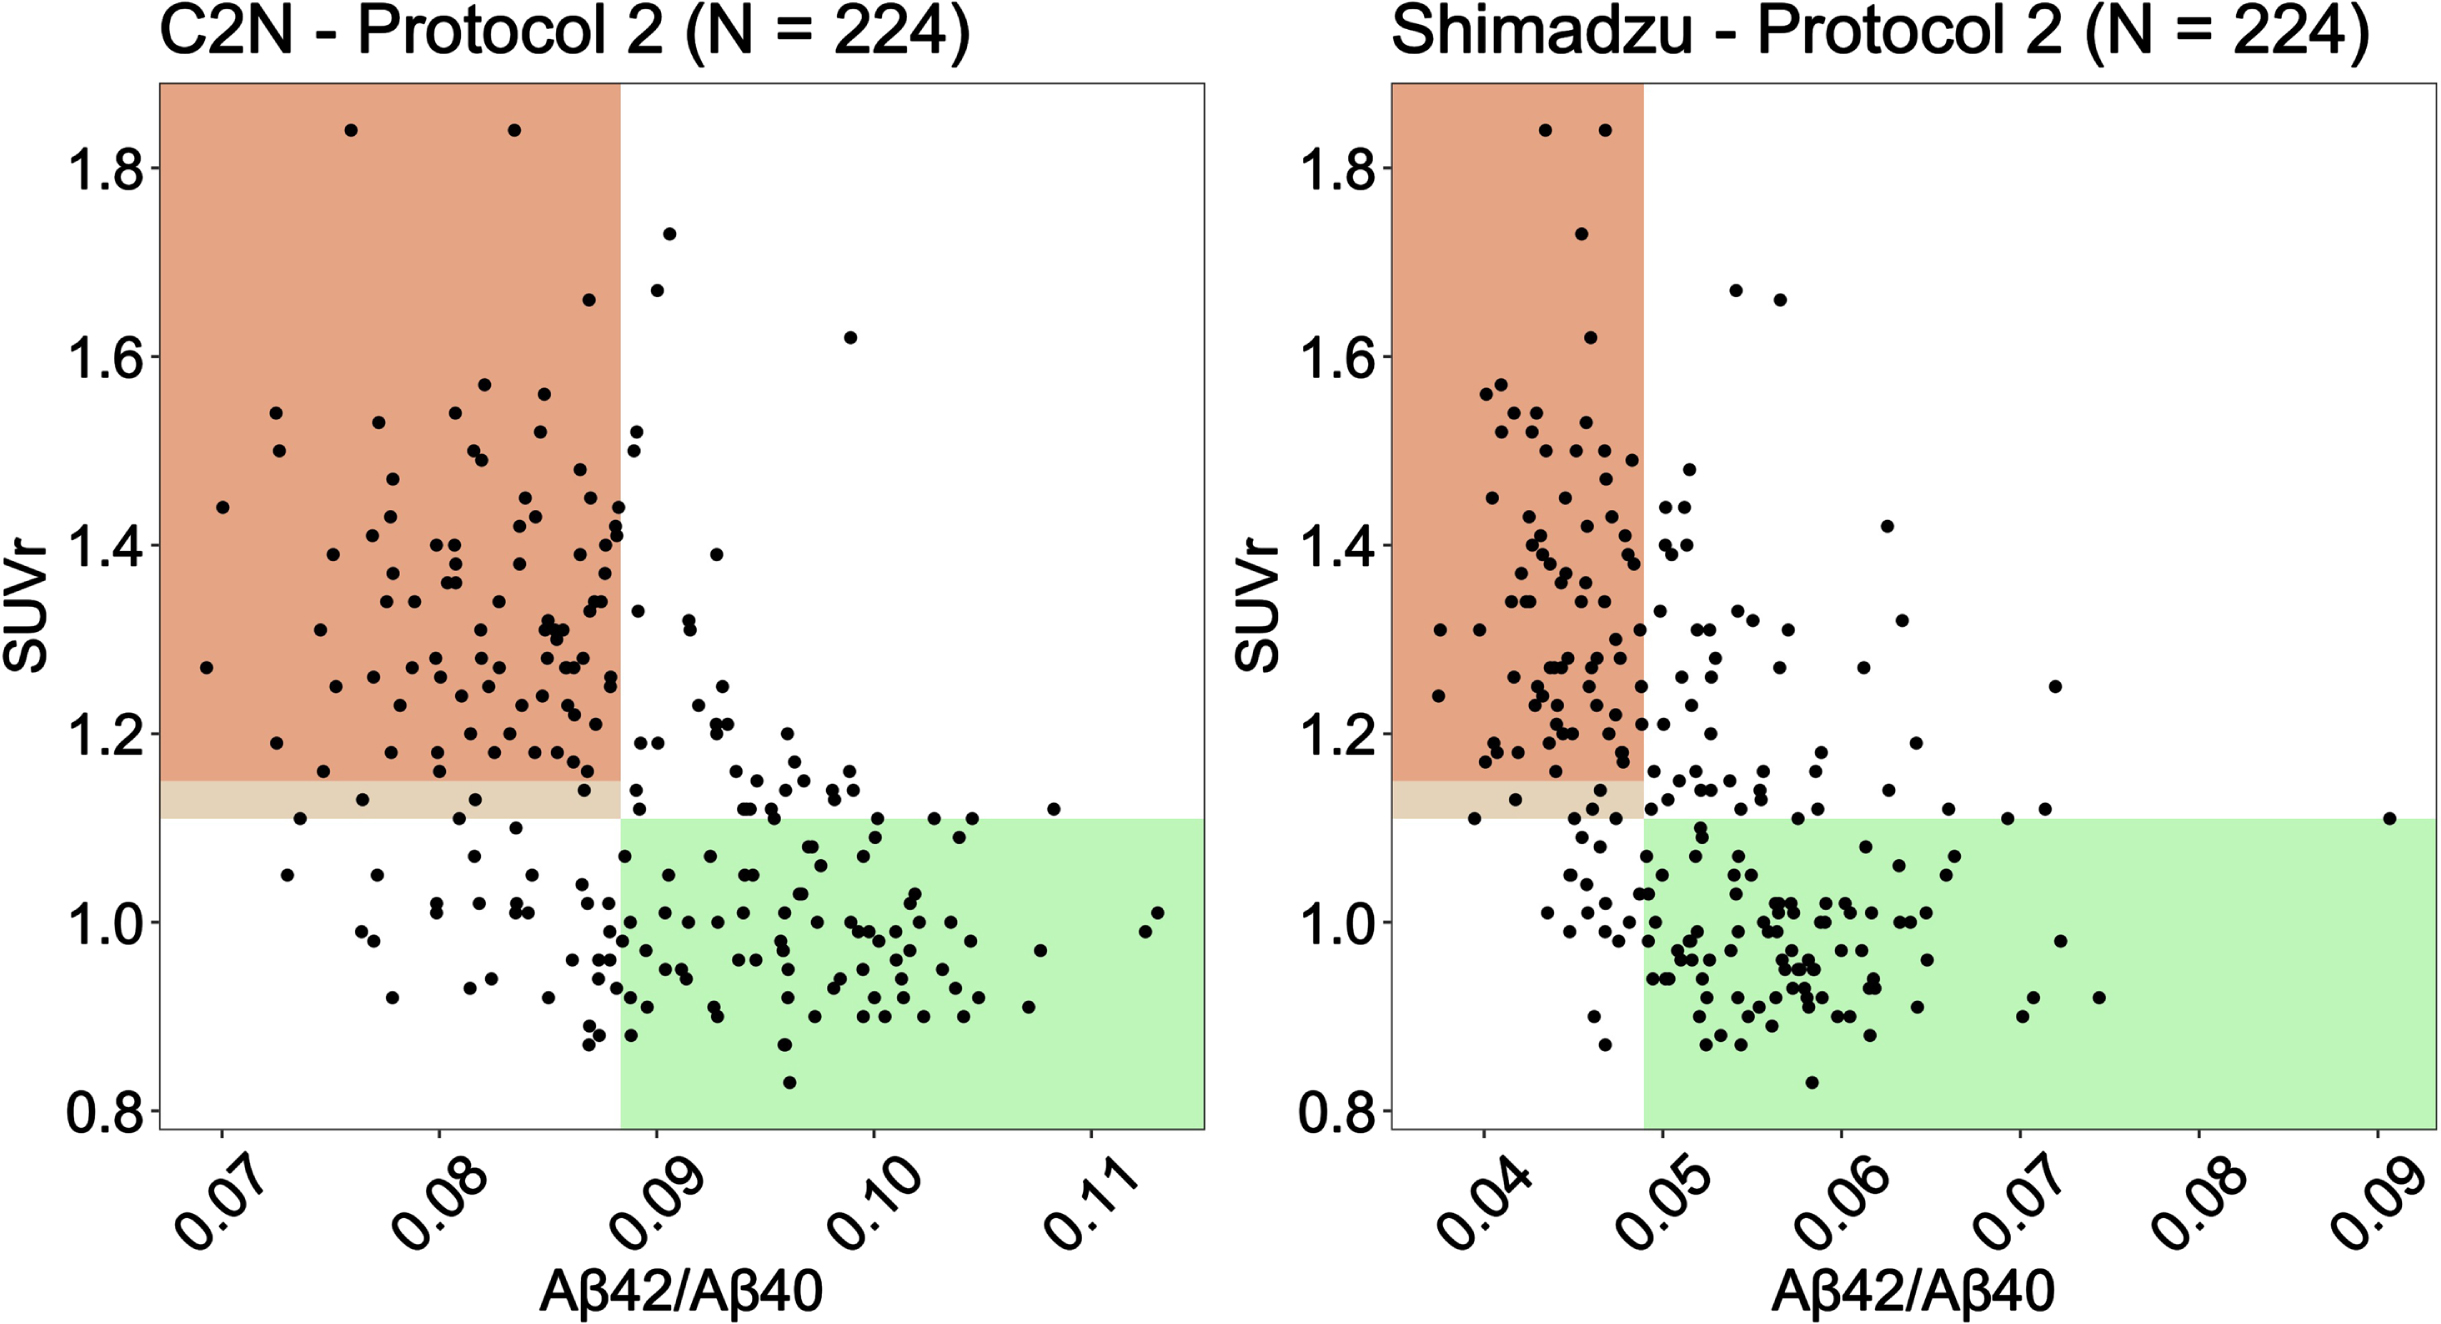 Scatter plots of Aβ against PET SUVr for C2 N and Shimadzu under Protocol 2 (2 h post phlebotomy). Shaded regions represent the areas where the plasma biomarker correctly identifies patients as amyloid negative (green) and amyloid positive (orange).